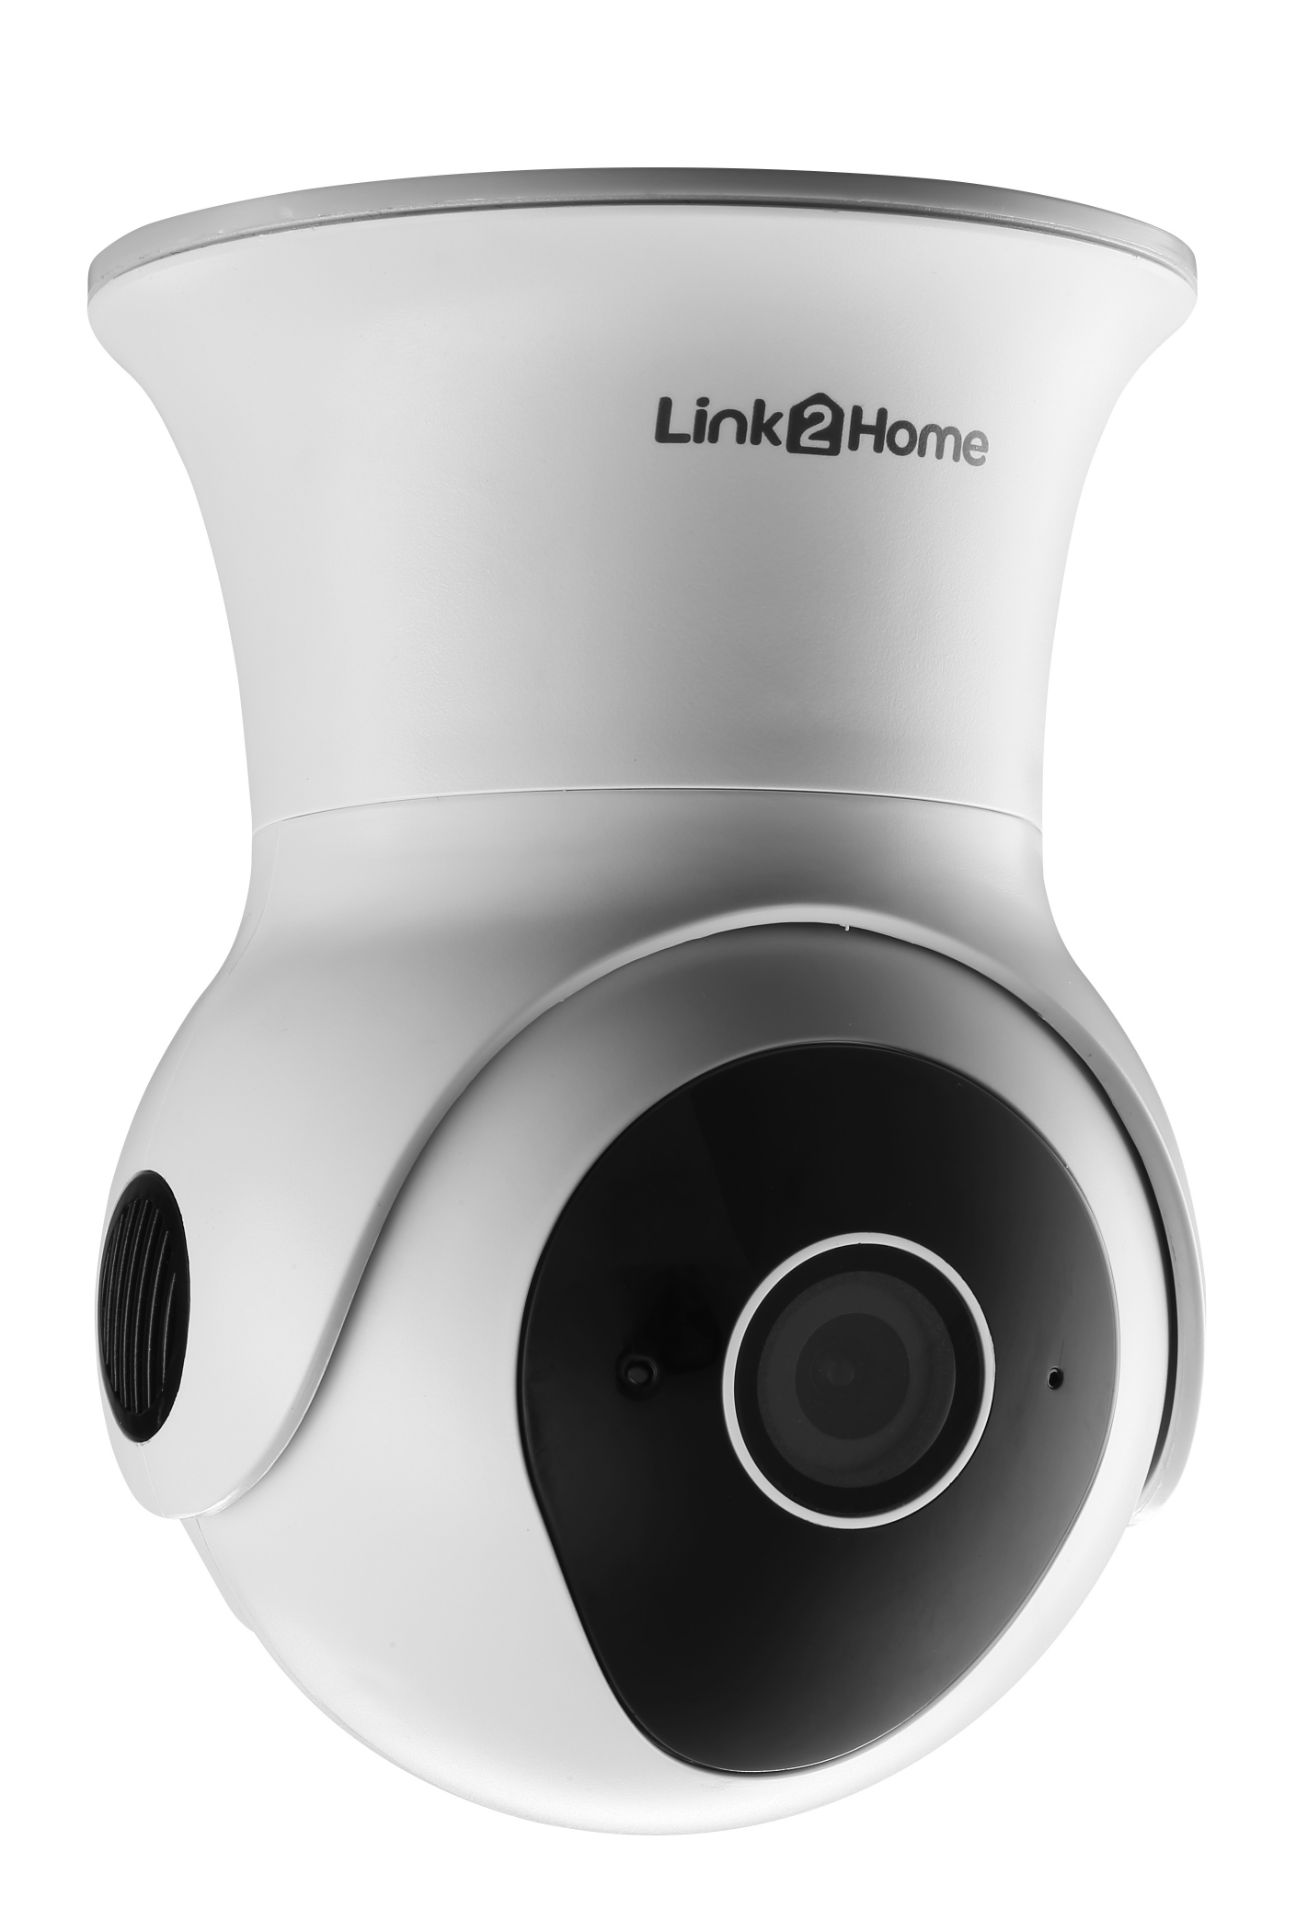 5 x Link2Home 'L2H-ODRCameraP/T' External Weatherproof Wi-Fi Cameras with Pan and Tilt Operation - - Image 4 of 14